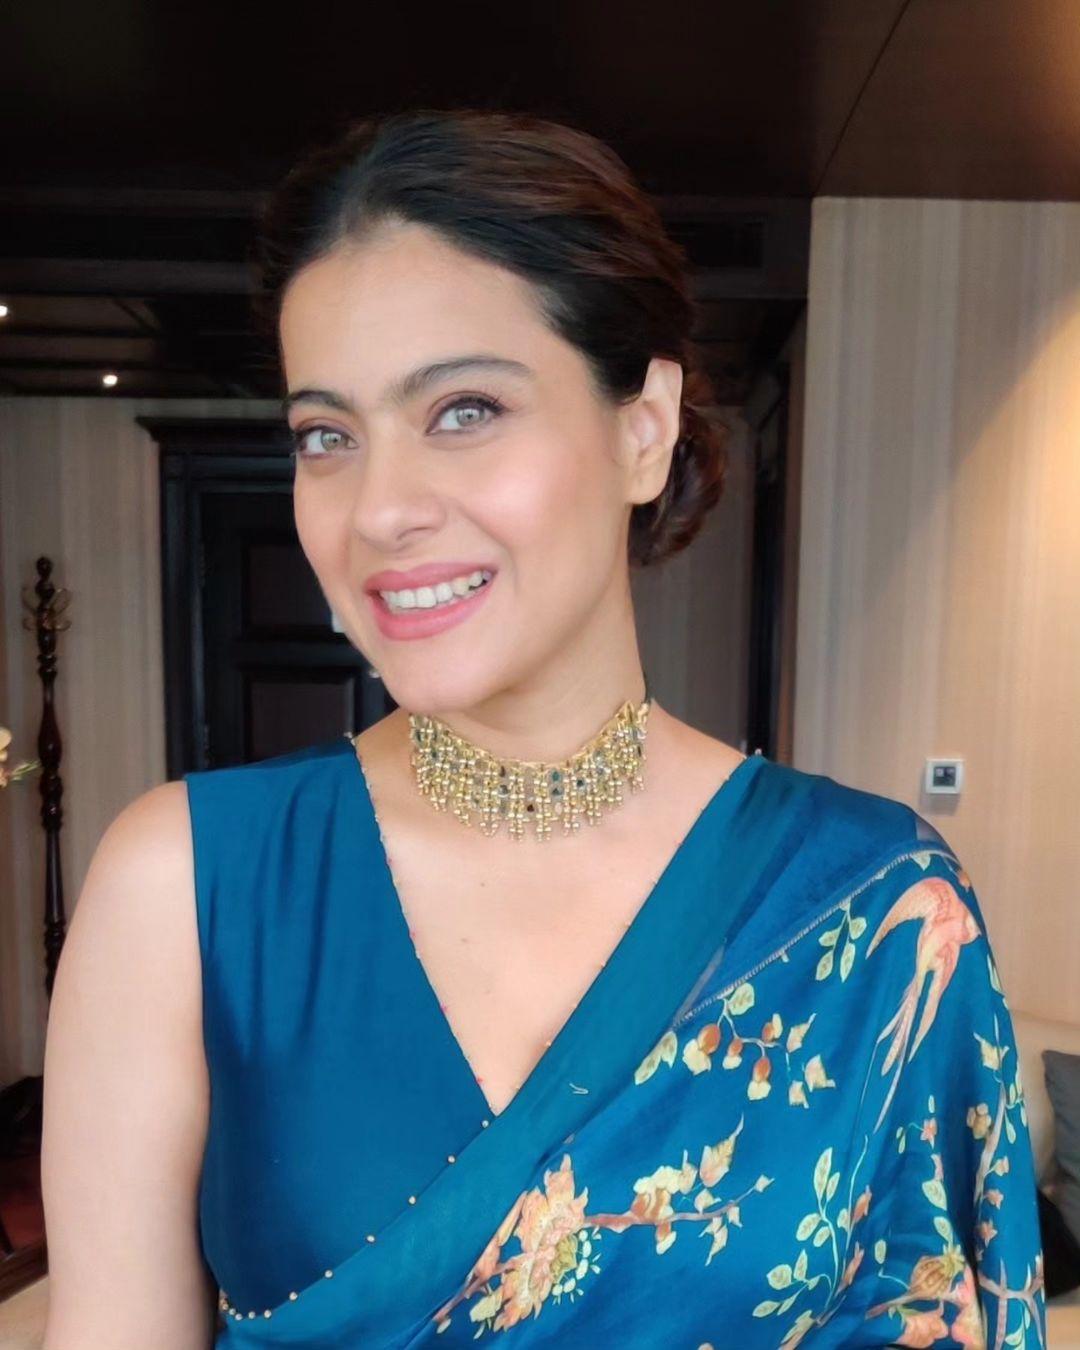 Kajol, the daughter of Tanuja and Shomu Mukherjee, stepped into the world of acting with her debut in 